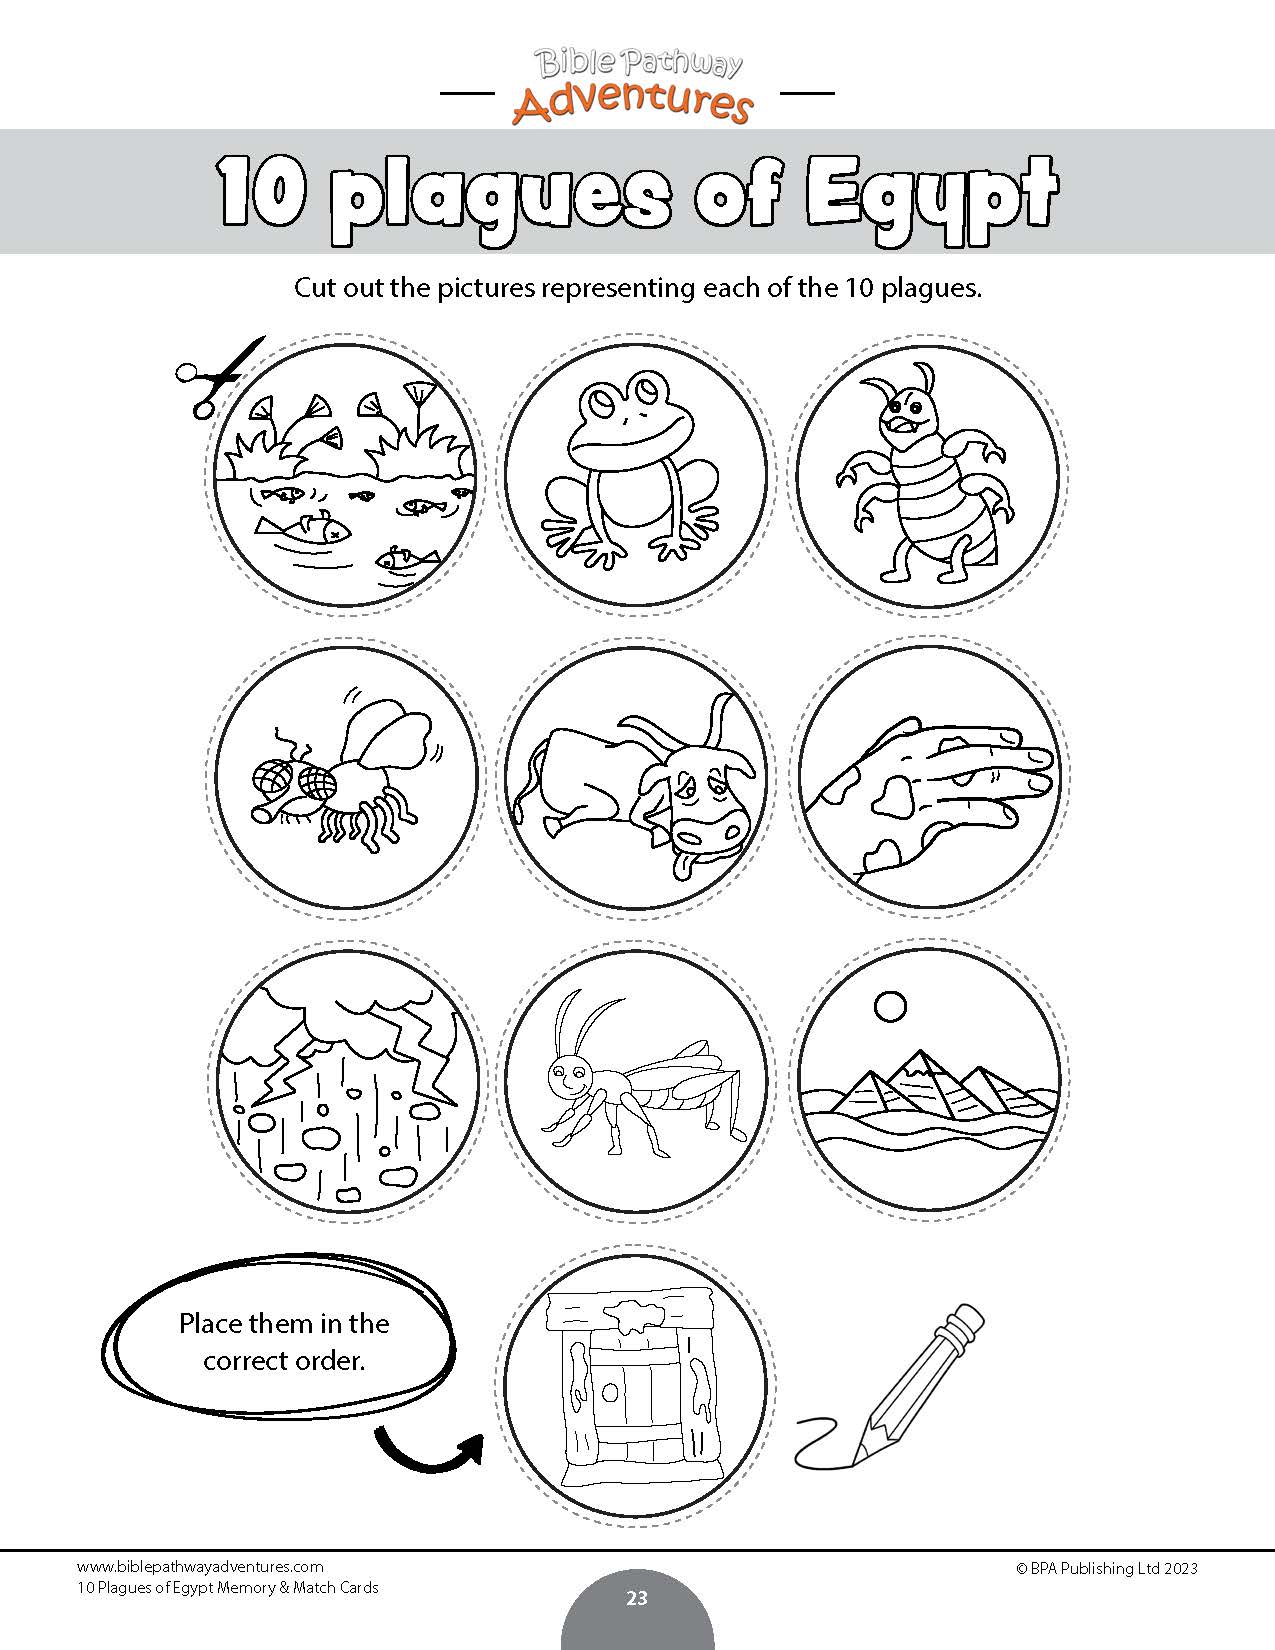 Plagues of egypt memory match cards pdf â bible pathway adventures